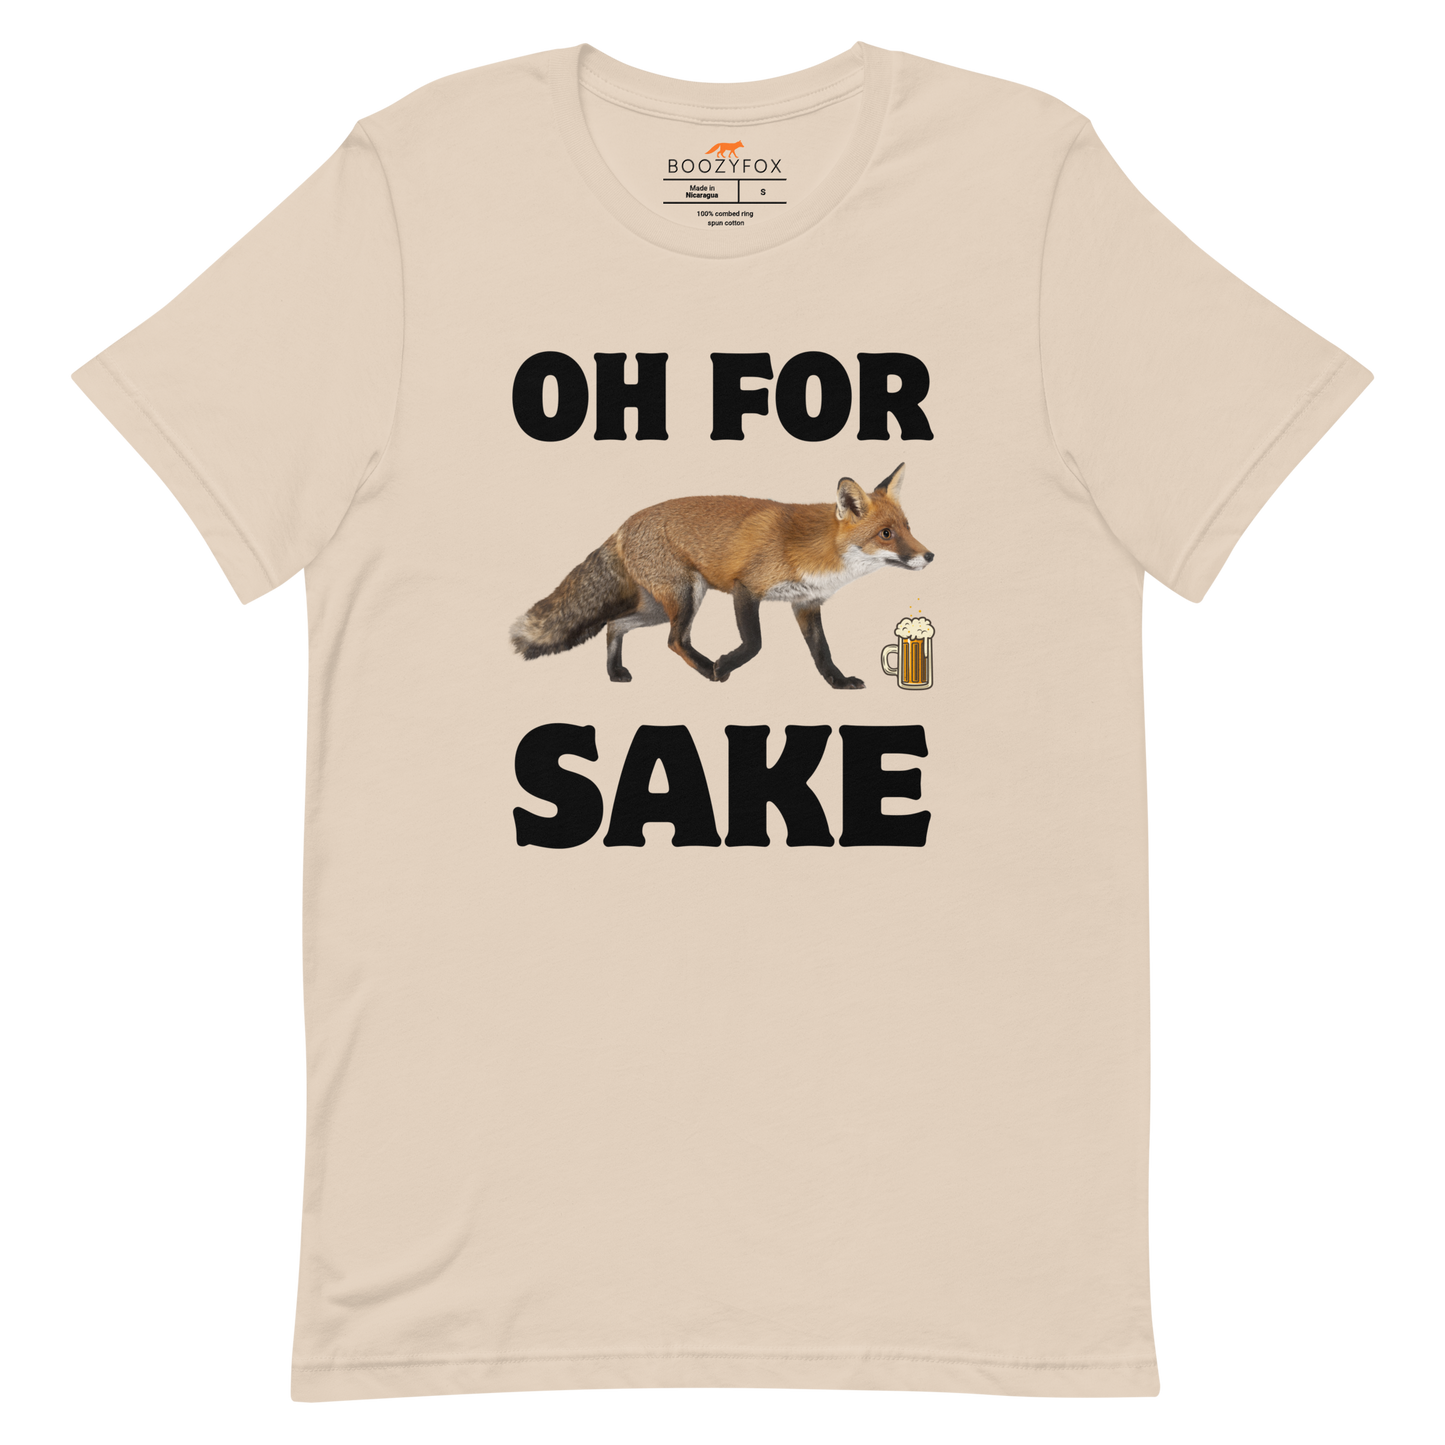 Soft Cream Premium Fox T-Shirt featuring a Oh For Fox Sake graphic on the chest - Funny Graphic Fox Tees - Boozy Fox